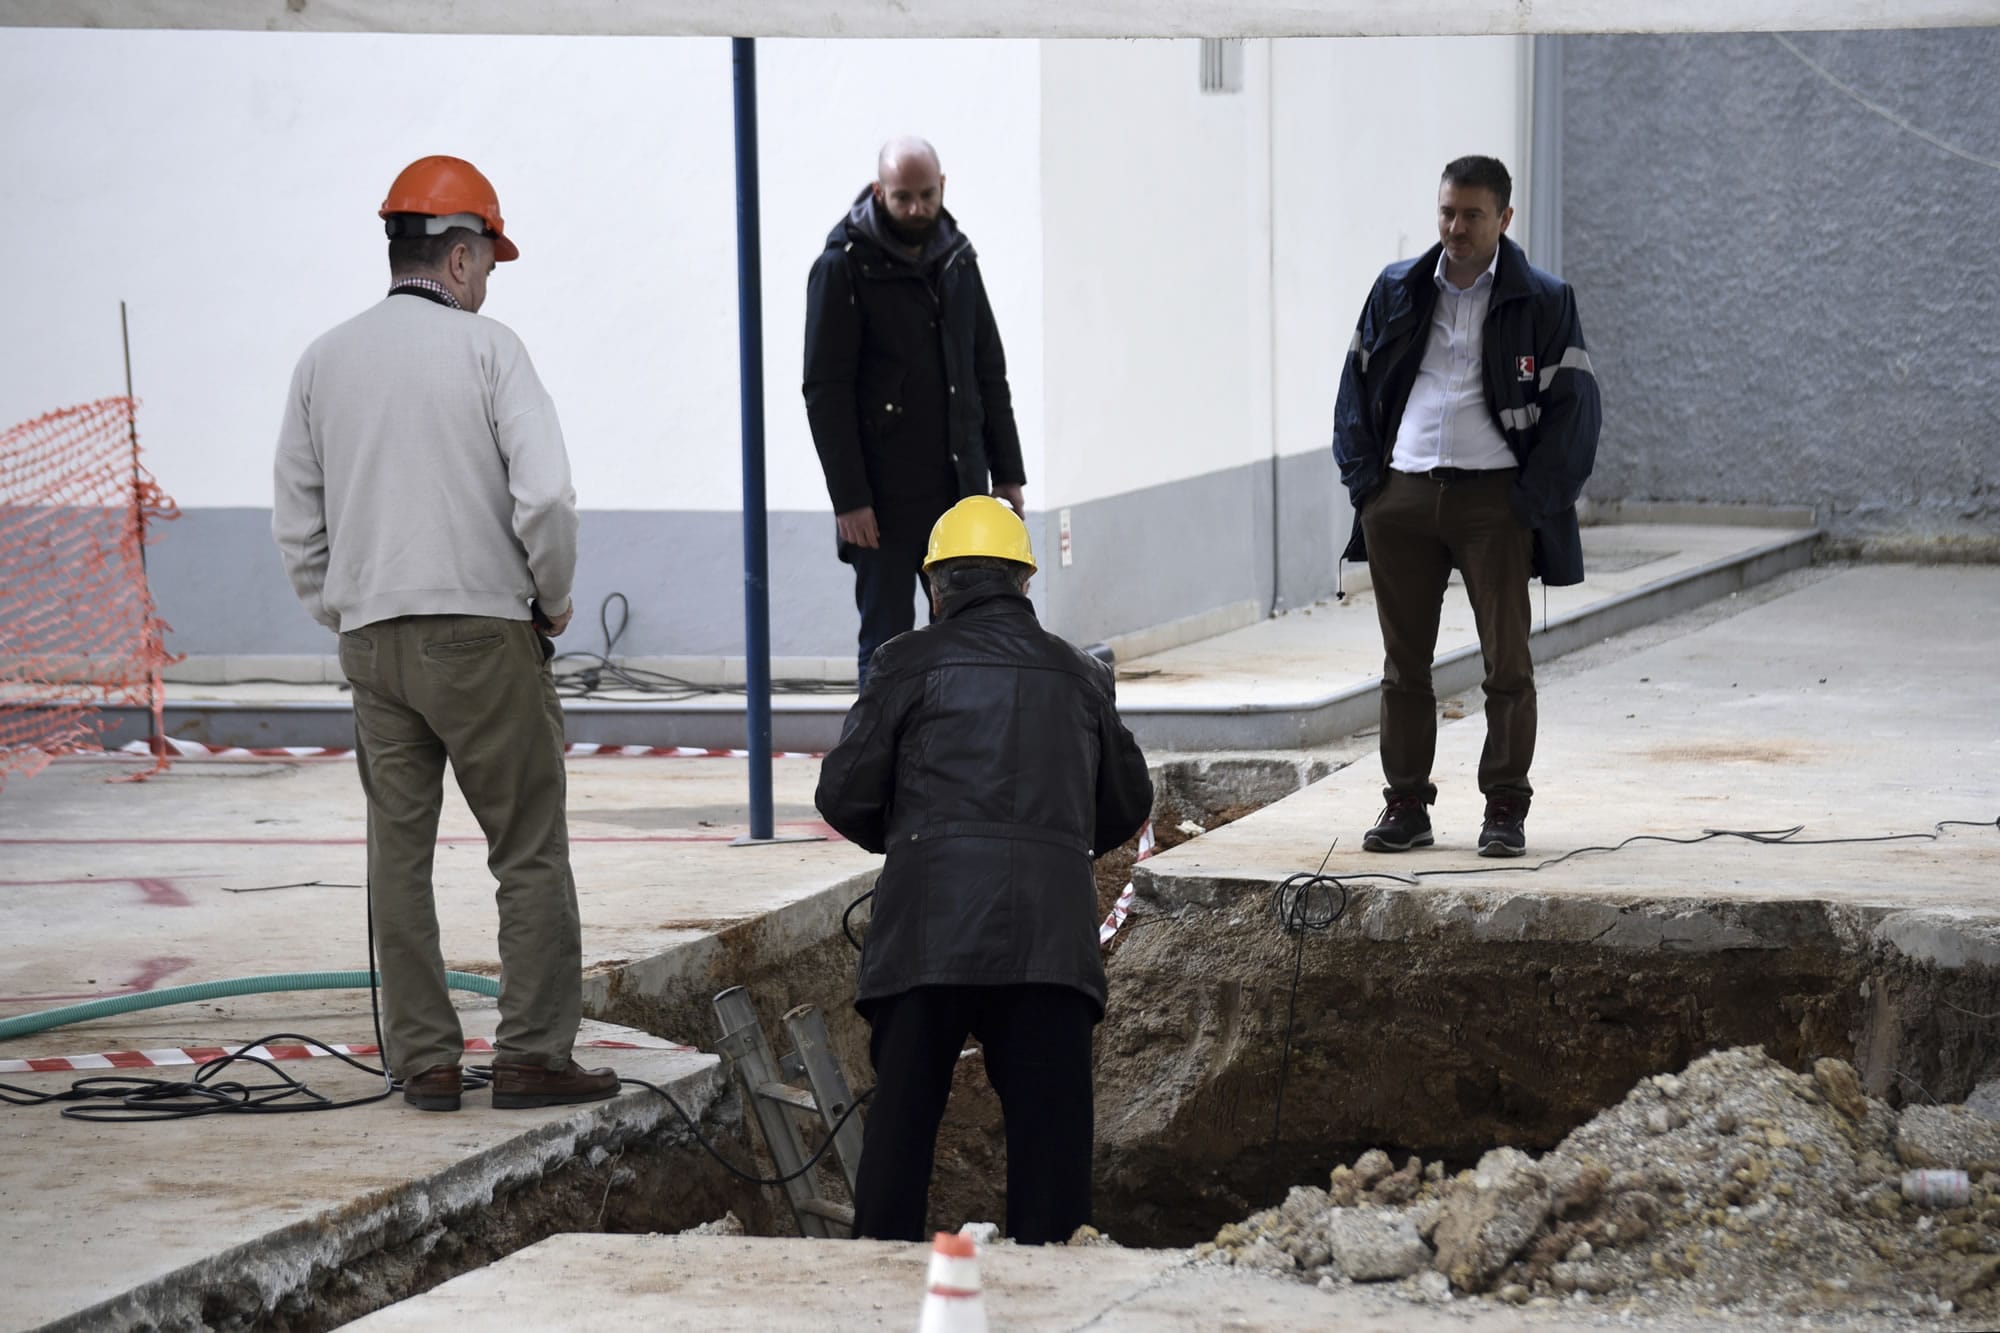 Experts check the location where an unexploded World War II bomb was found 5 meters (over 16 feet) deep, at a gas station in the northern Greek city of Thessaloniki, on Thursday, Feb. 9, 2016. Authorities in Greece's second-largest city on Sunday are planning to evacuate up to 60,000 residents from their homes so experts can safely dispose of the unexploded World War II bomb.